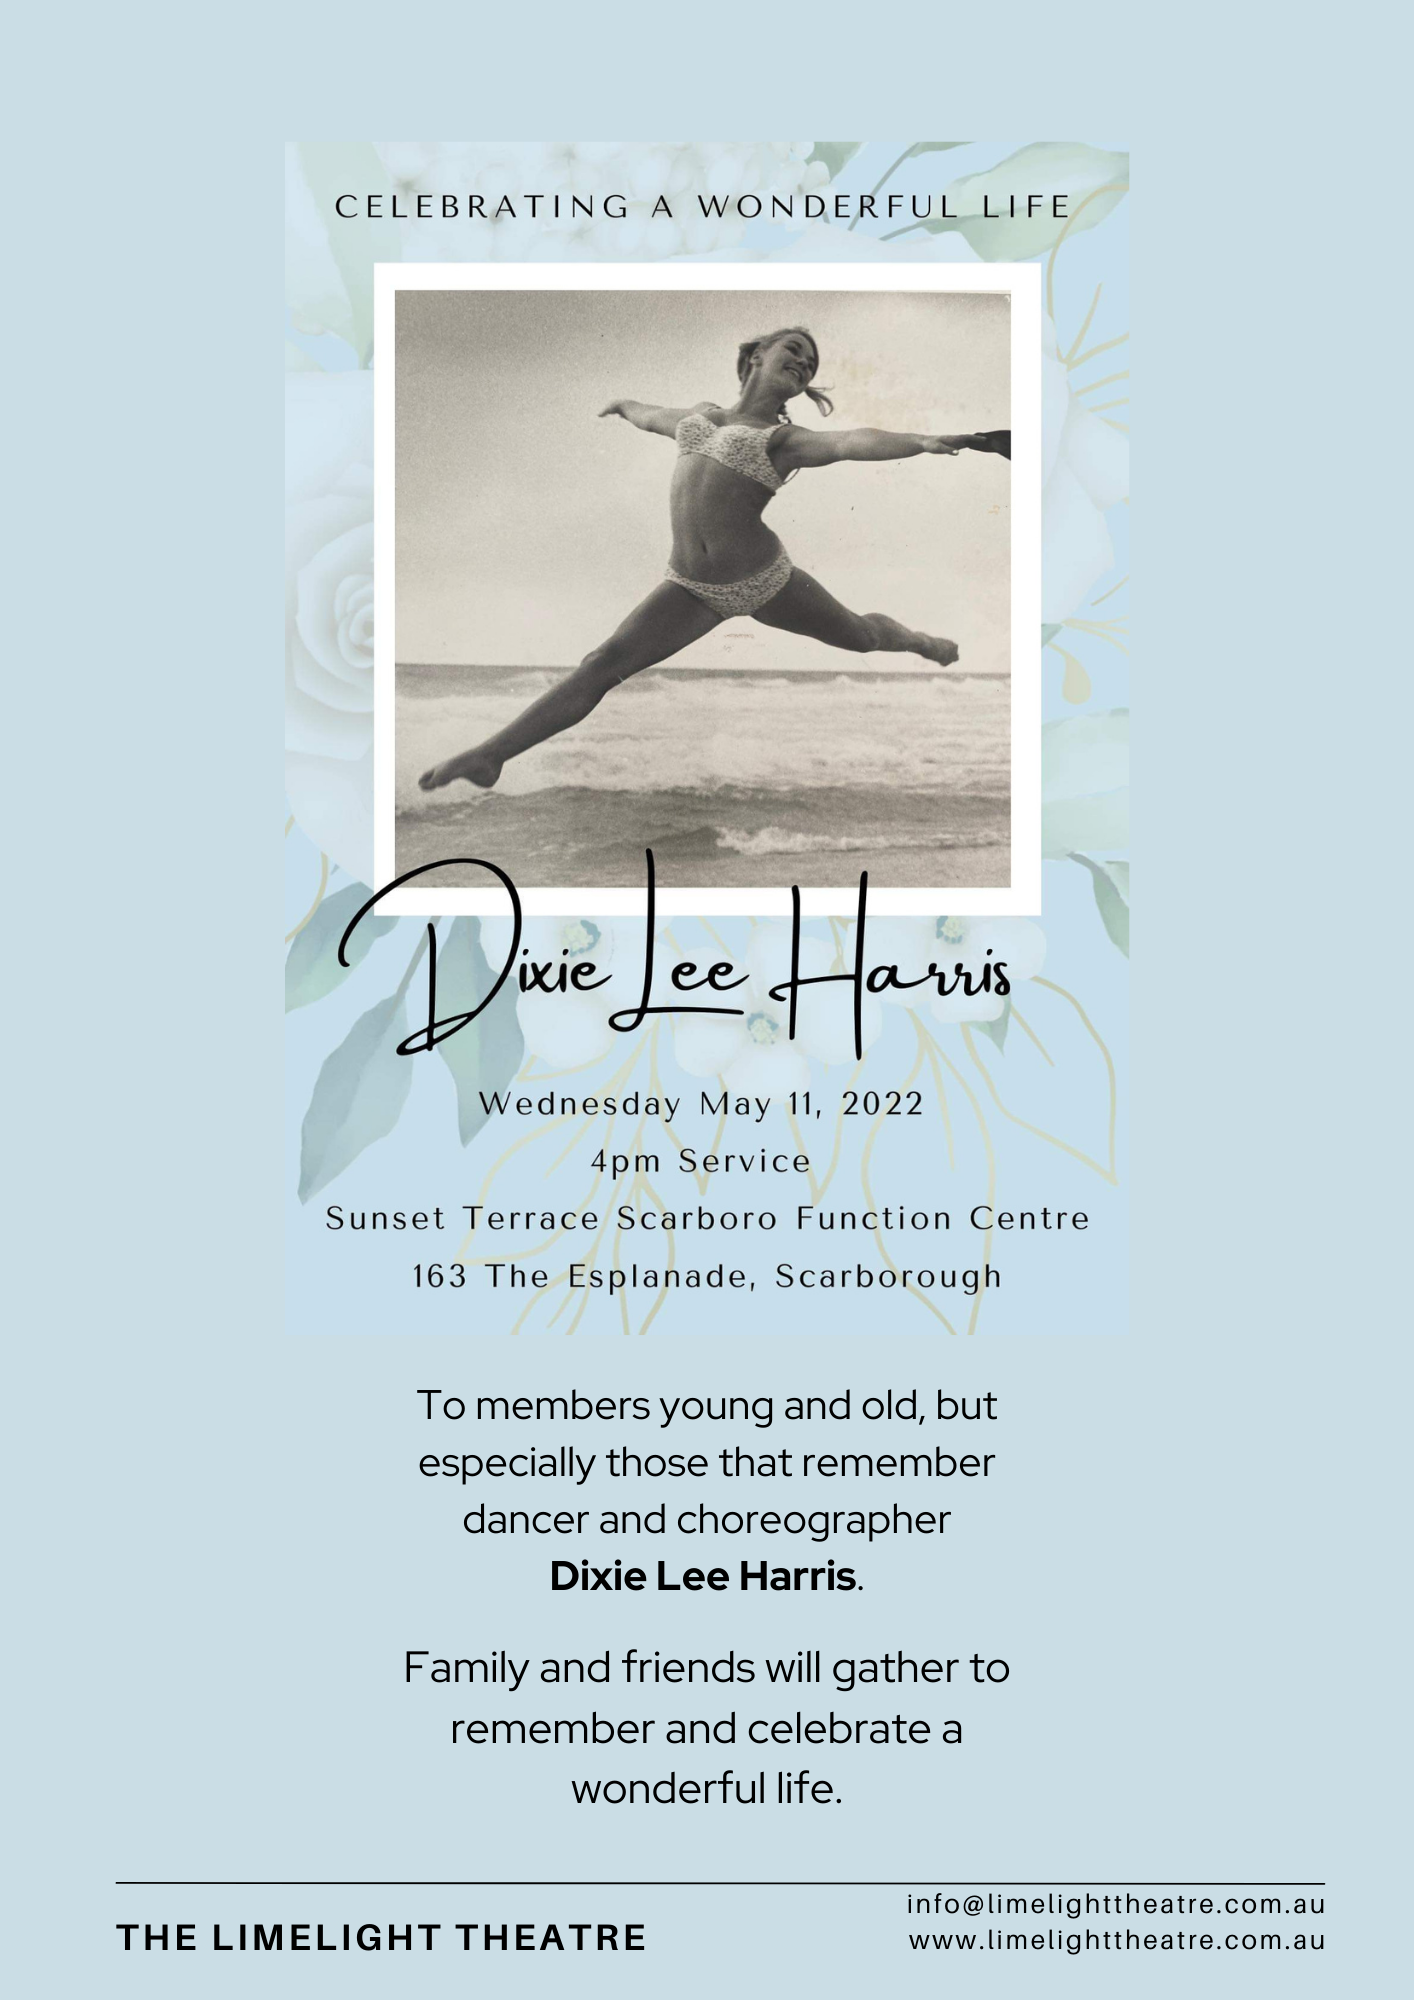 The funeral for choreographer DIxie Lee Harris will be held Wednesday May 11 4pm at Sunset Terrace Scarboro Function Centre